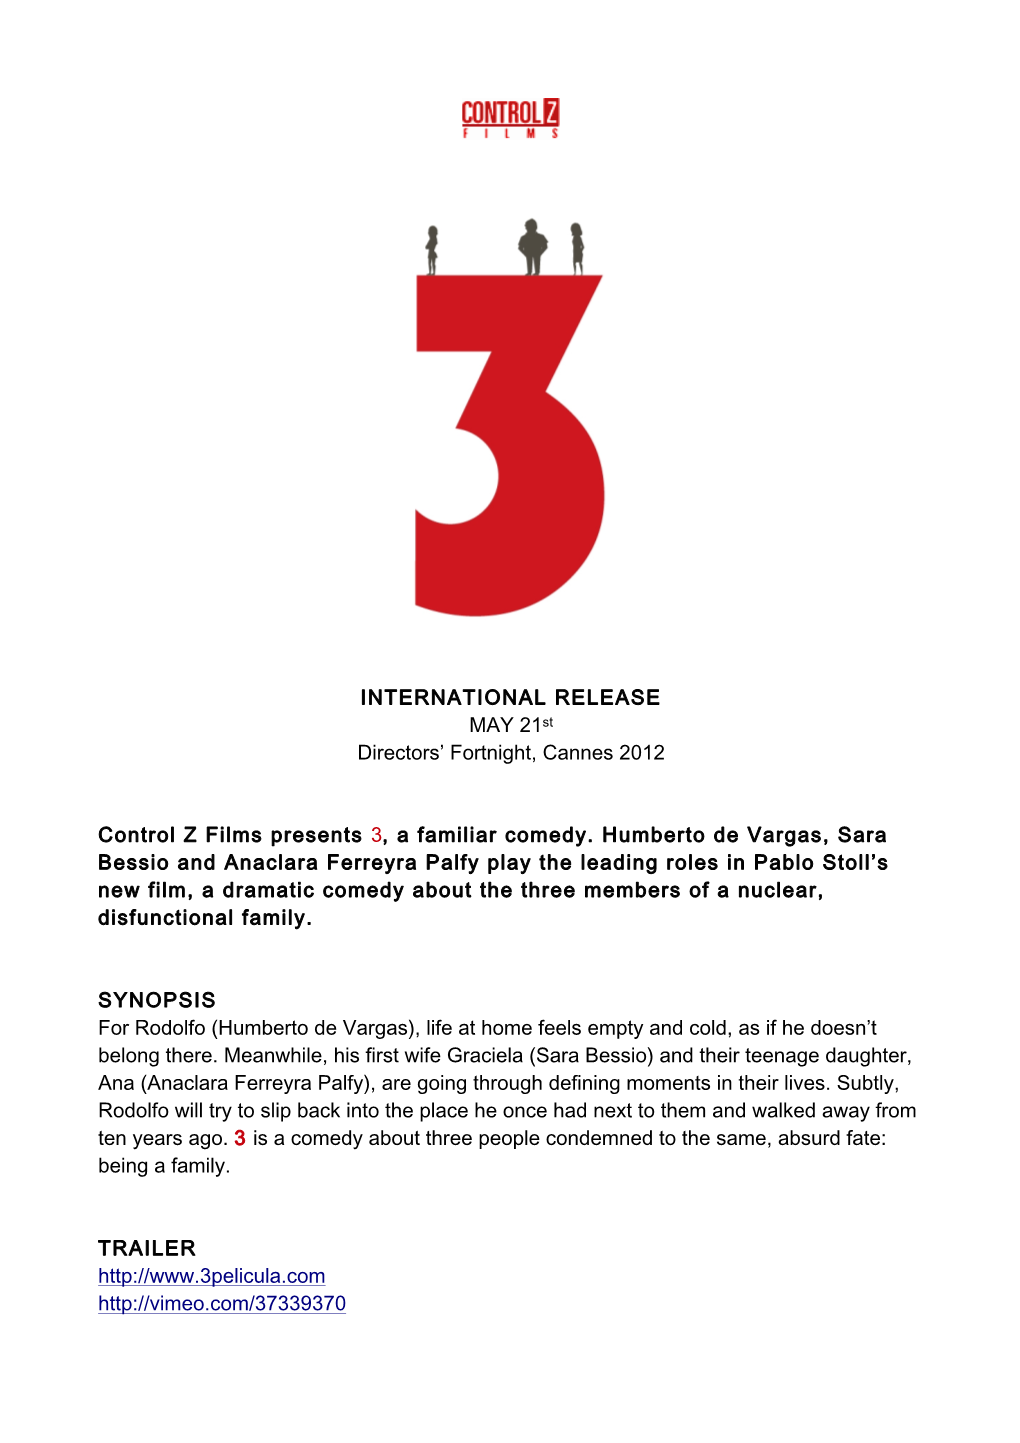 INTERNATIONAL RELEASE MAY 21St Directors' Fortnight, Cannes